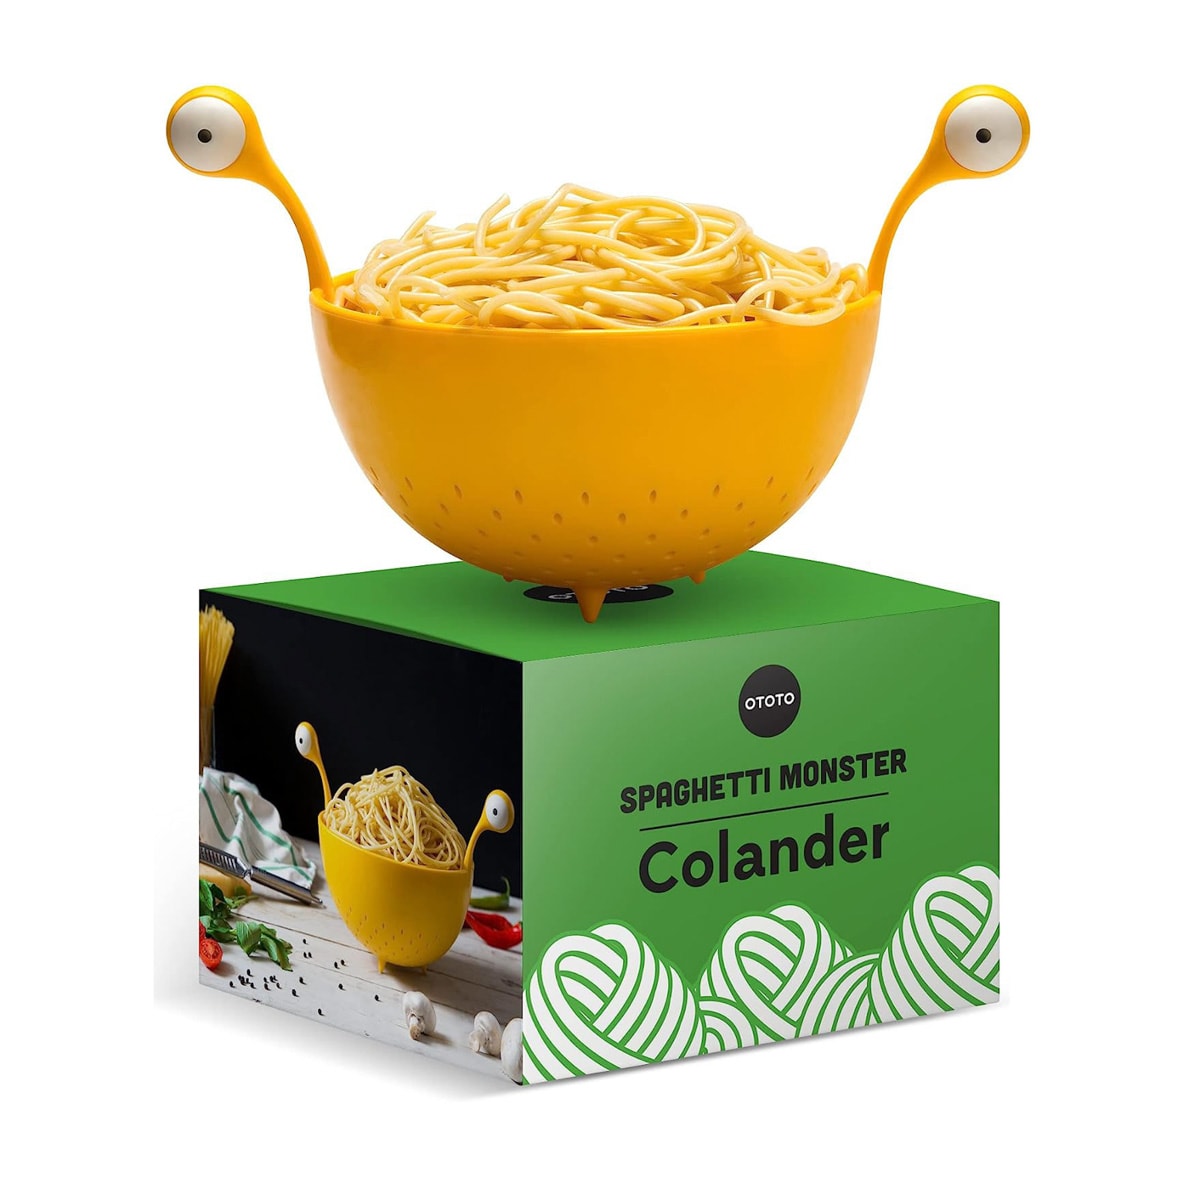 A yellow colander with monster eyes full of cooked spaghetti.